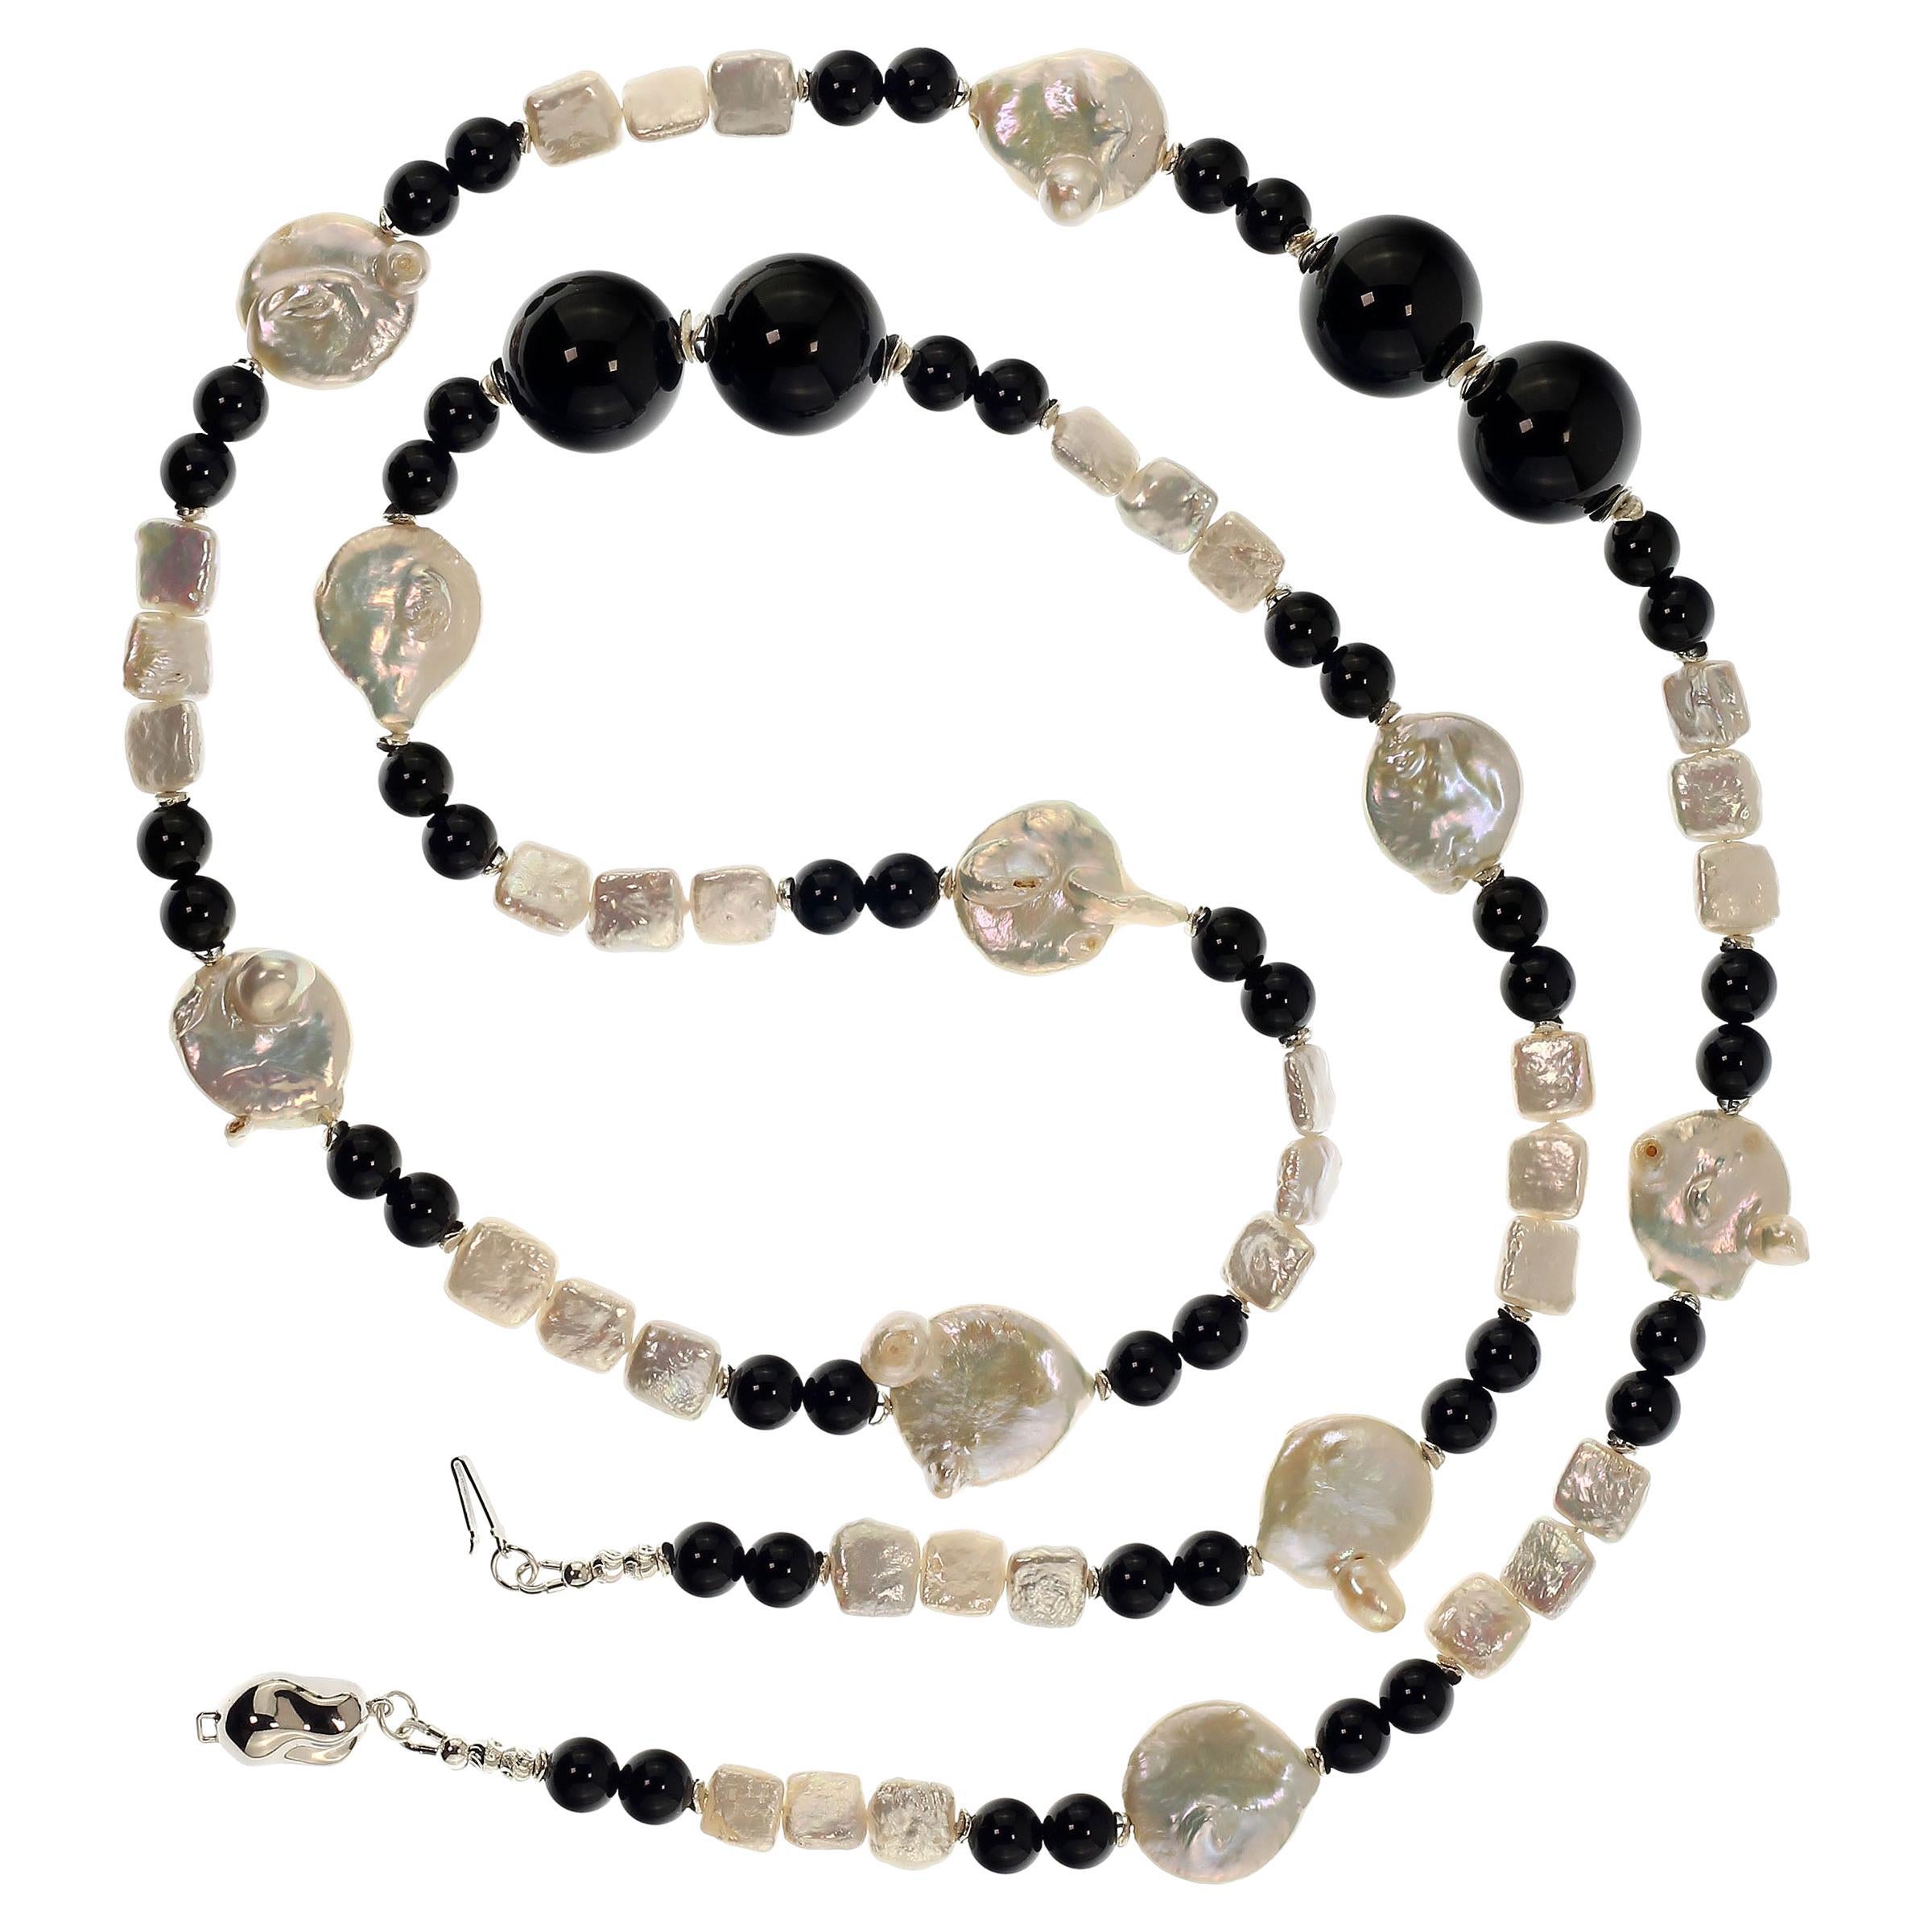 This is a lovely, long white Coin Pearl and Black Onyx necklace that is a pleasure to wear.  You can wear it long or double it.  It features white iridescent Coin Pearls, white square Pearls, and two sizes of highly polished smooth Black Onyx.  This